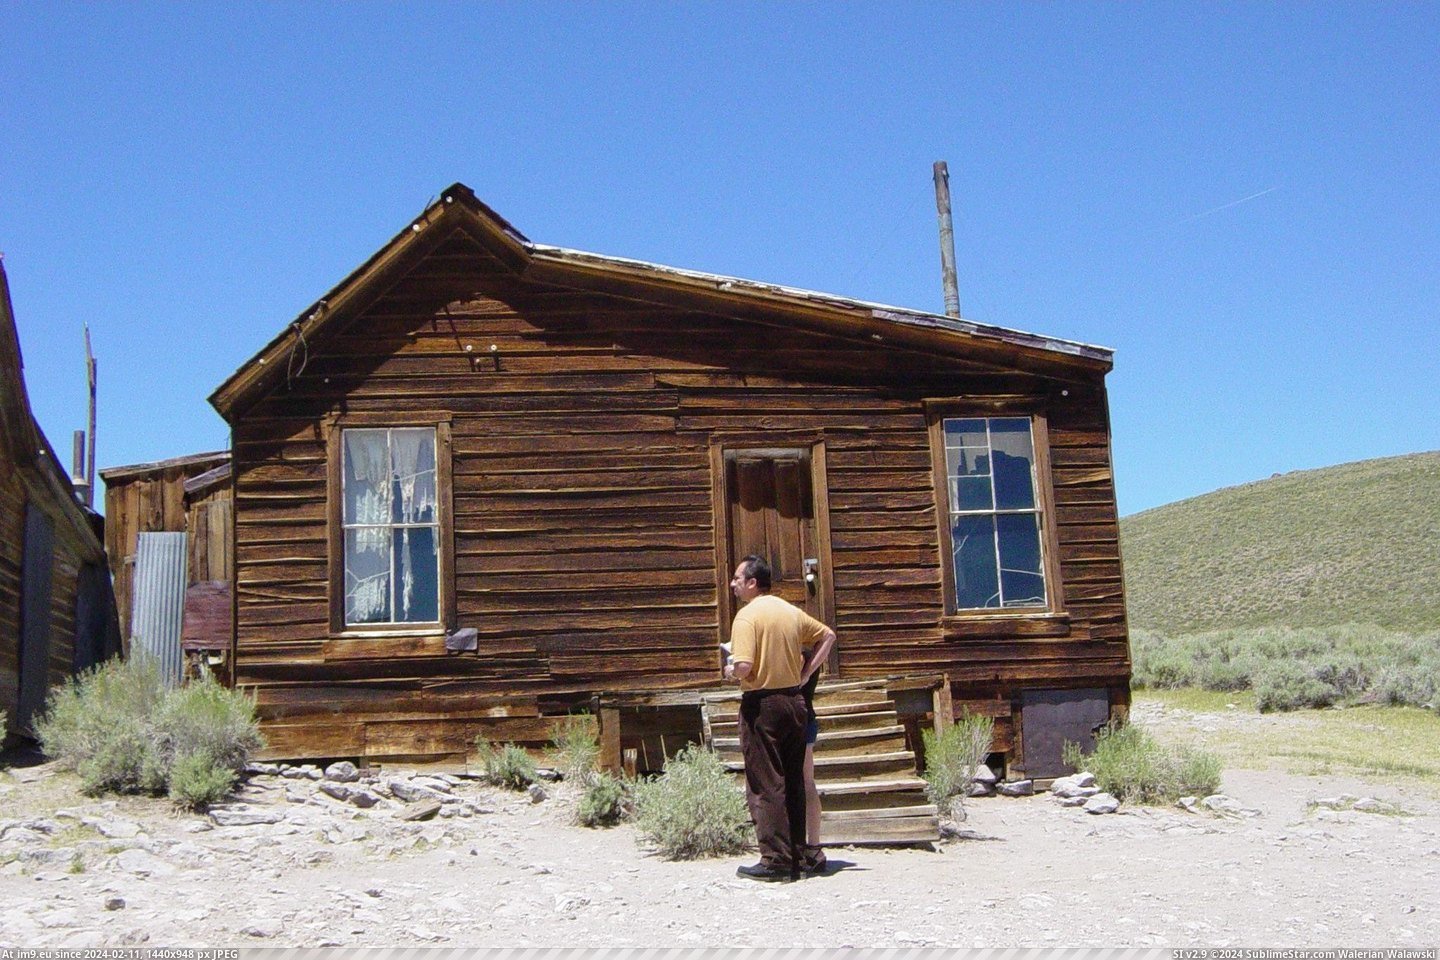 Lester E. Bell House In Bodie, California (in Bodie - a ghost town in Eastern California)